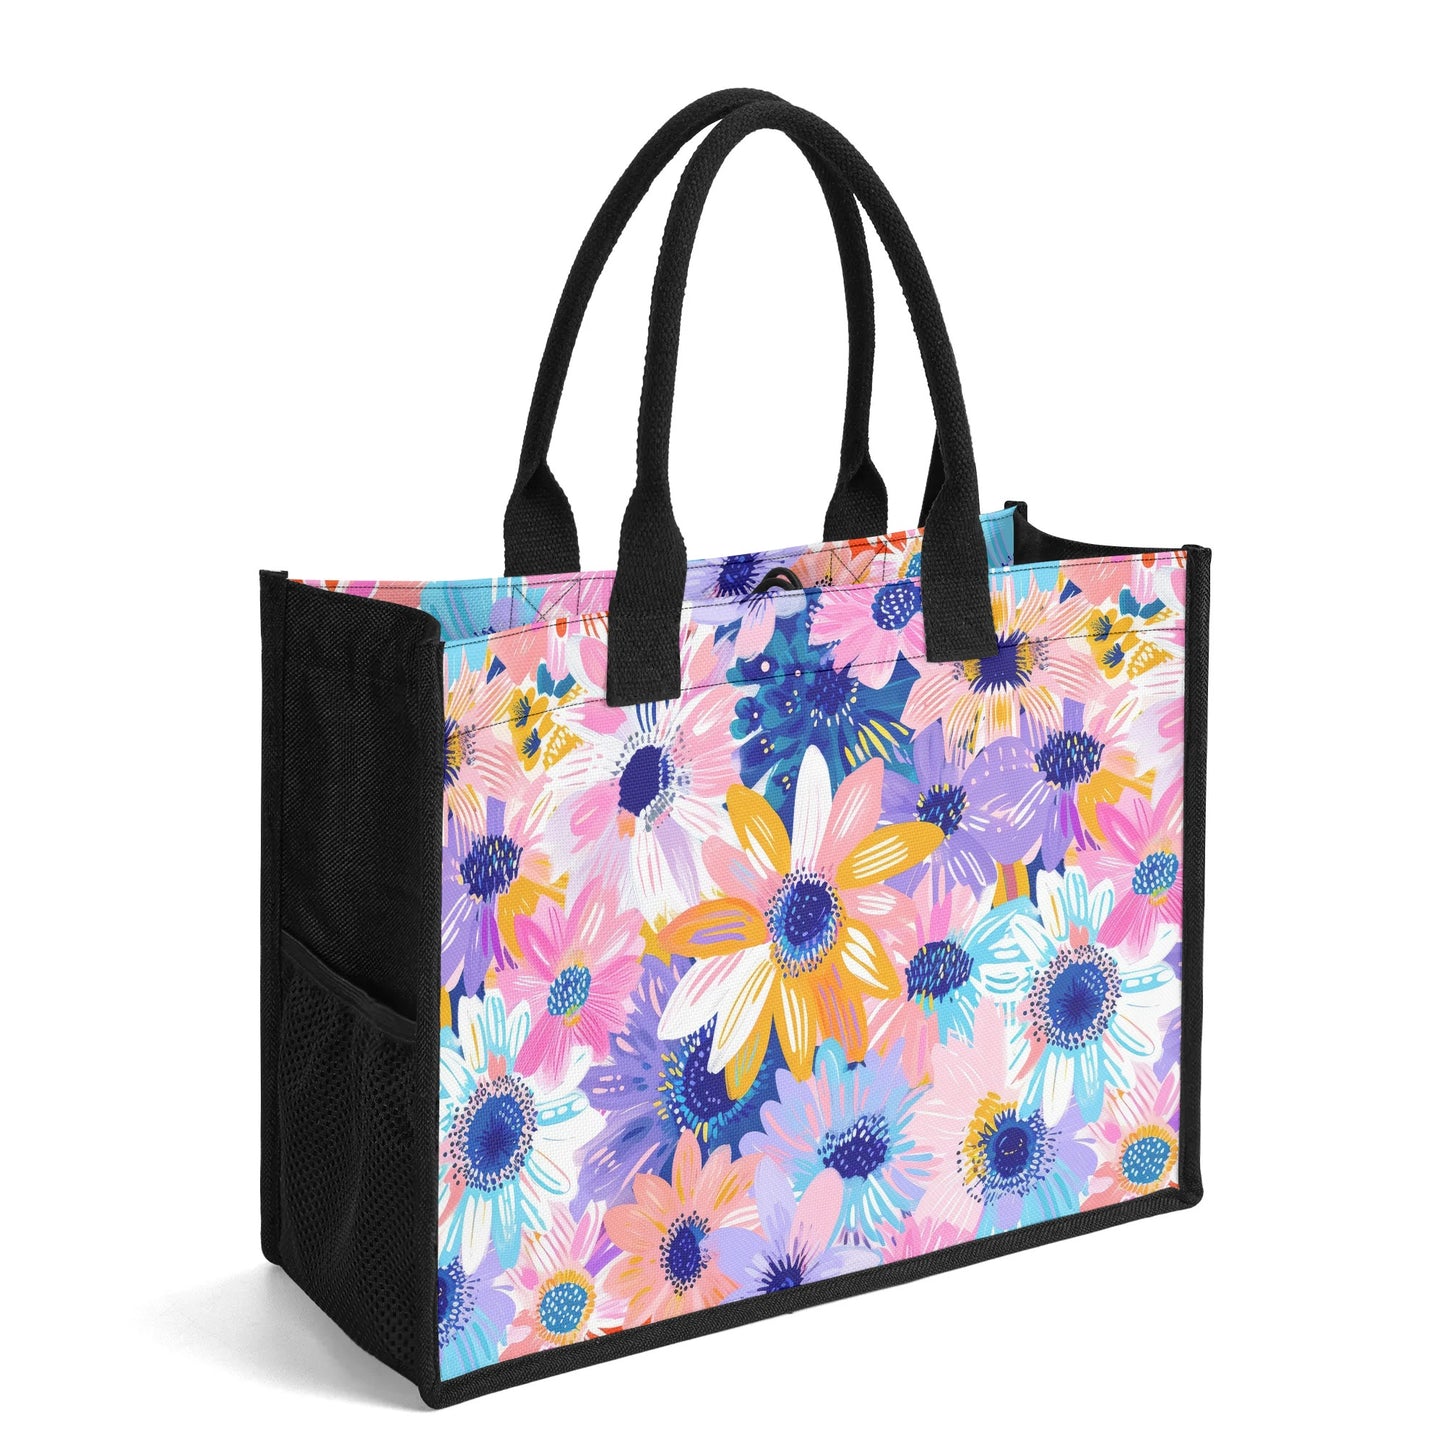 Watercolor Wonderland: Large Colorful Daisies Blooming with Radiance Structured Button Closure Canvas Tote Bag in 2 Sizes